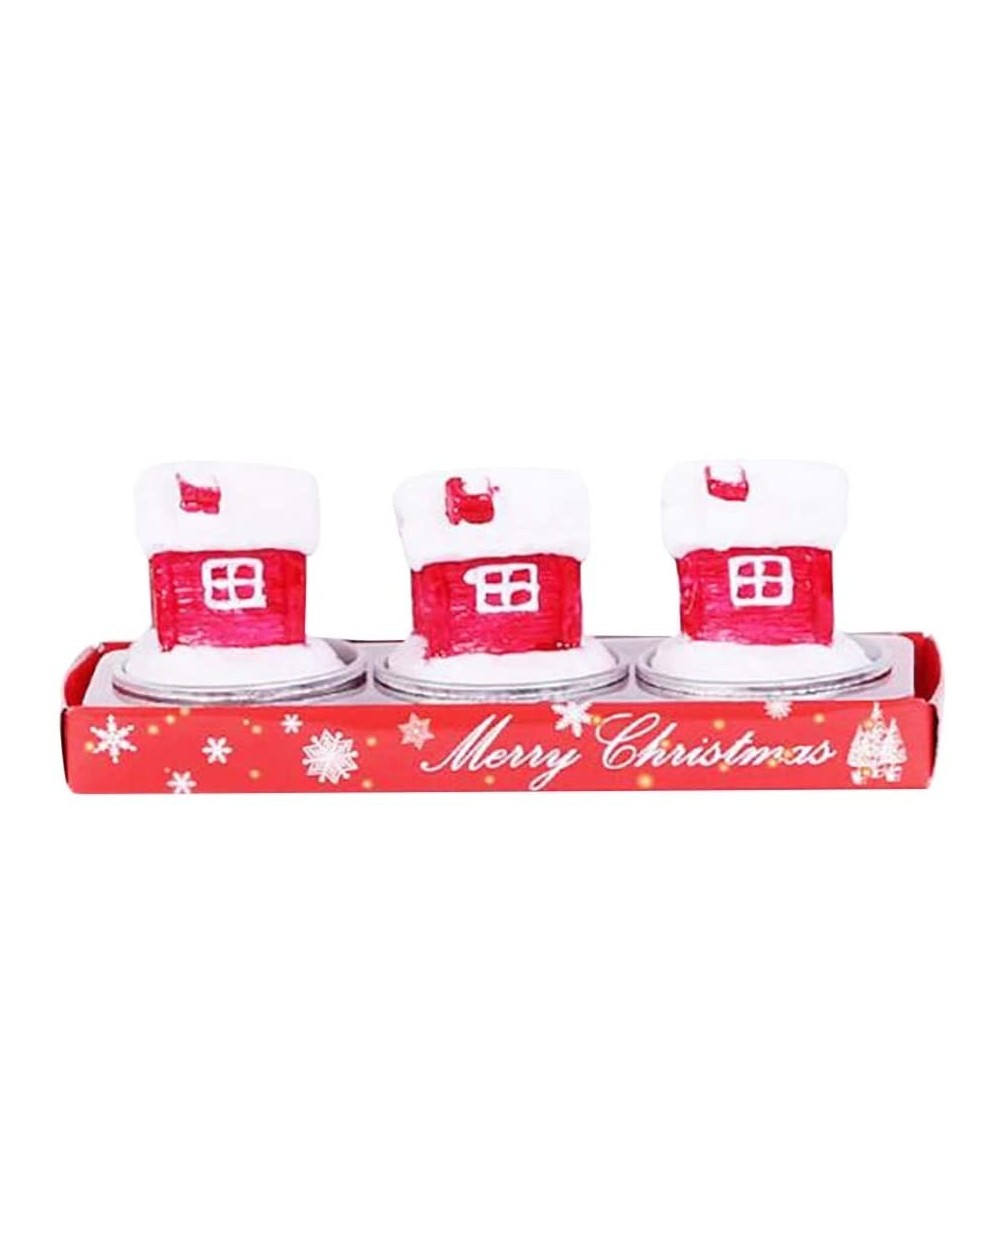 Swags Christmas Decor Christmas Party Cartoon Candles Happy Birthday Cake Topper Cute Decoration- Christmas Ornaments Advent ...